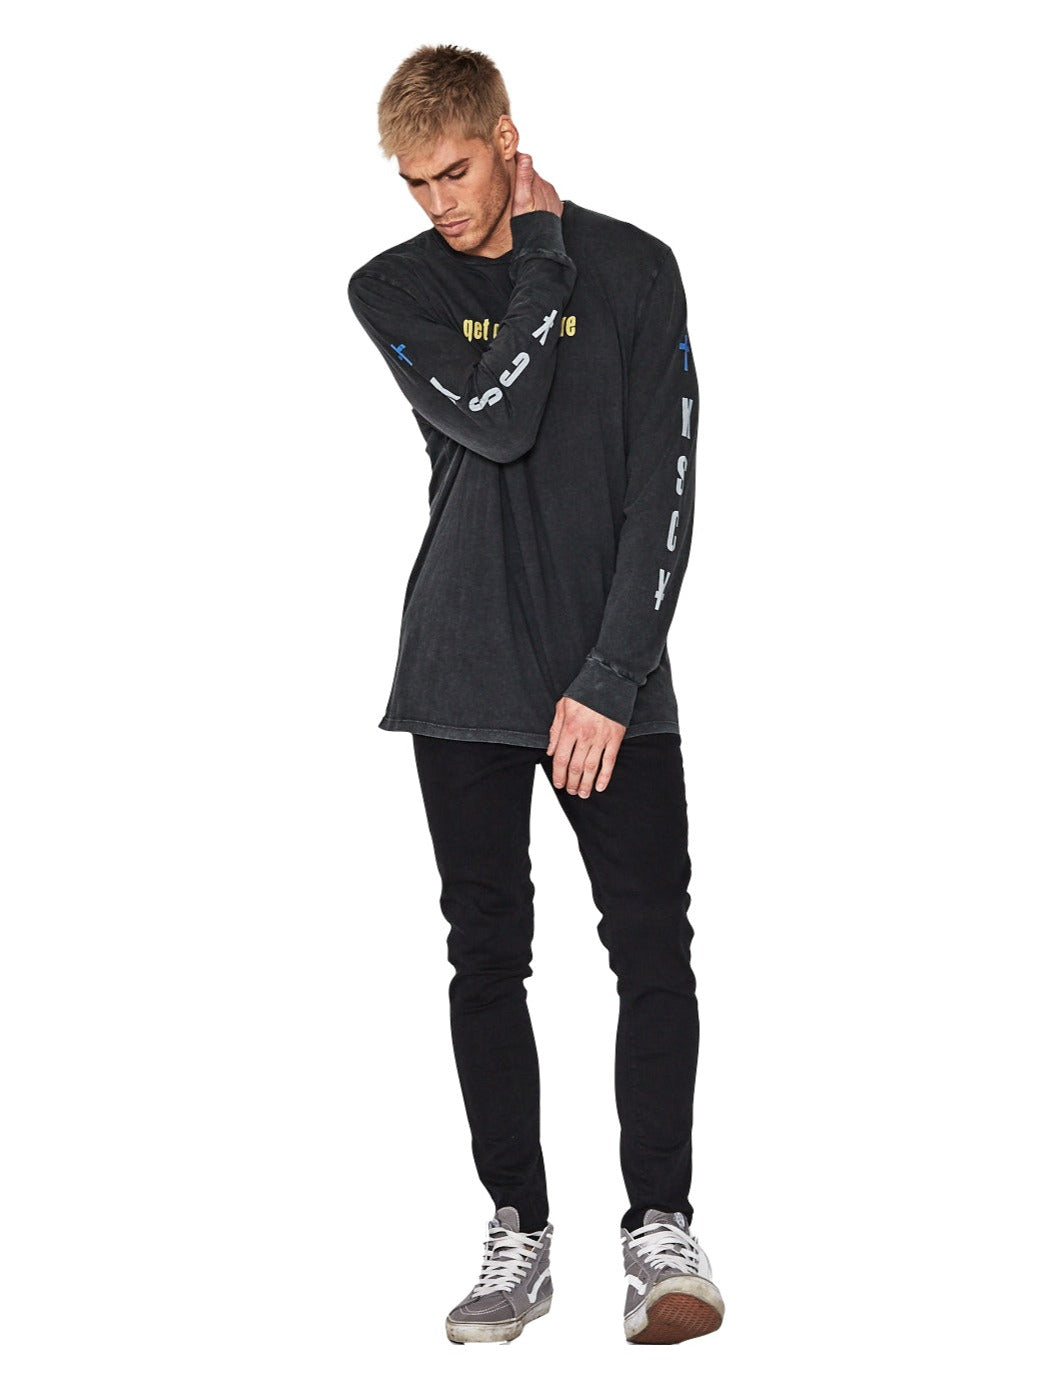 Kiss Chacey - Wave Rider Long Sleeve Tee - Vintage Black